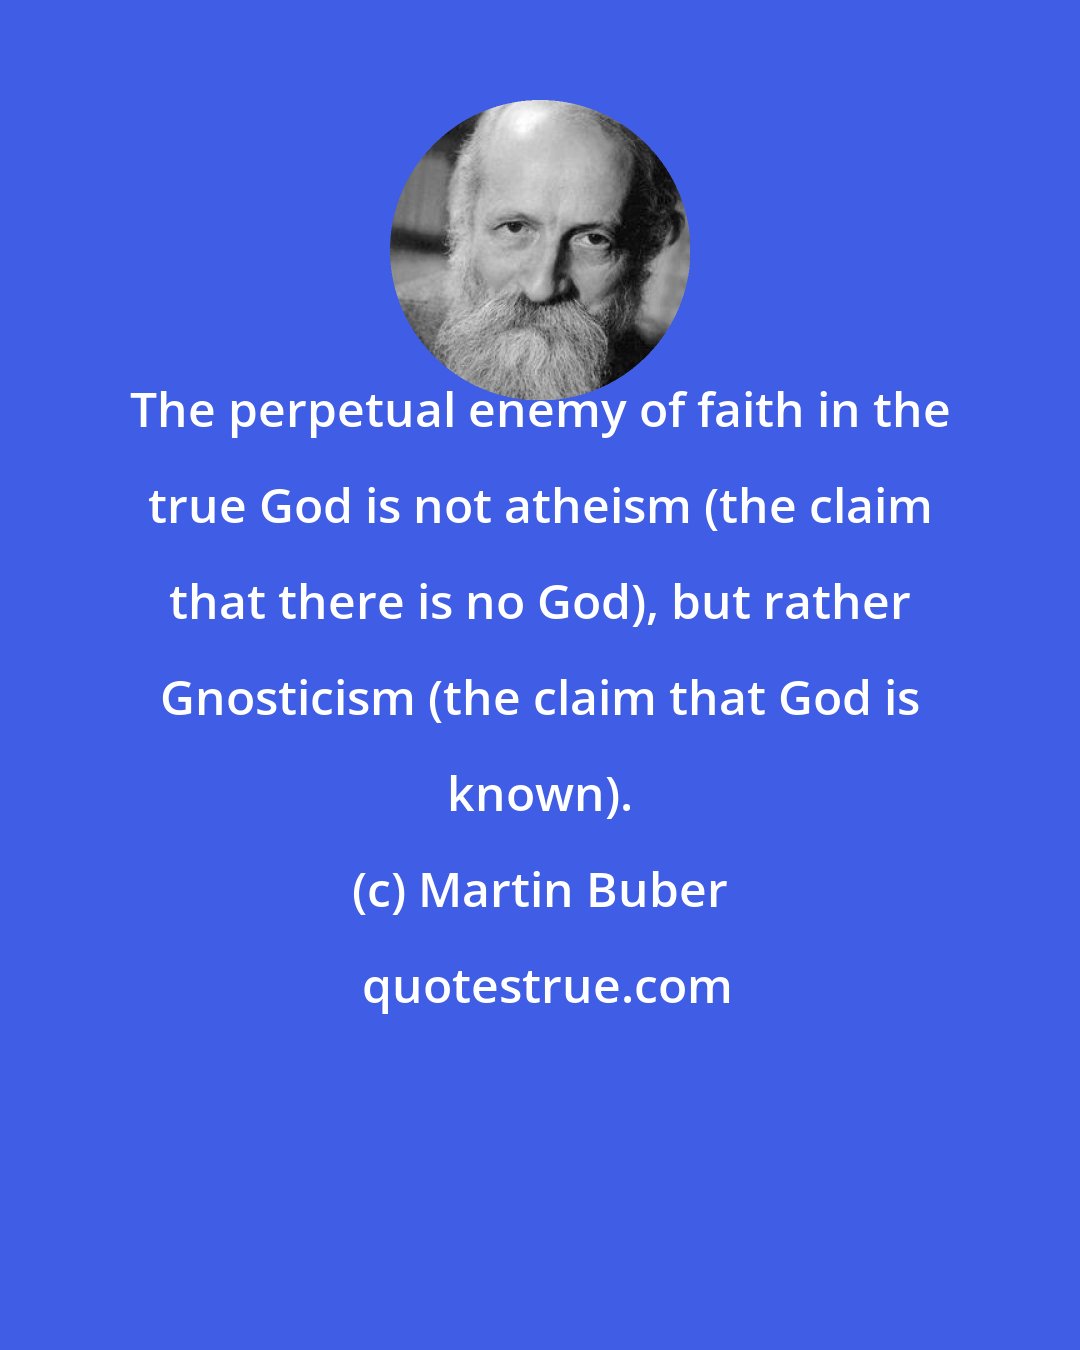 Martin Buber: The perpetual enemy of faith in the true God is not atheism (the claim that there is no God), but rather Gnosticism (the claim that God is known).